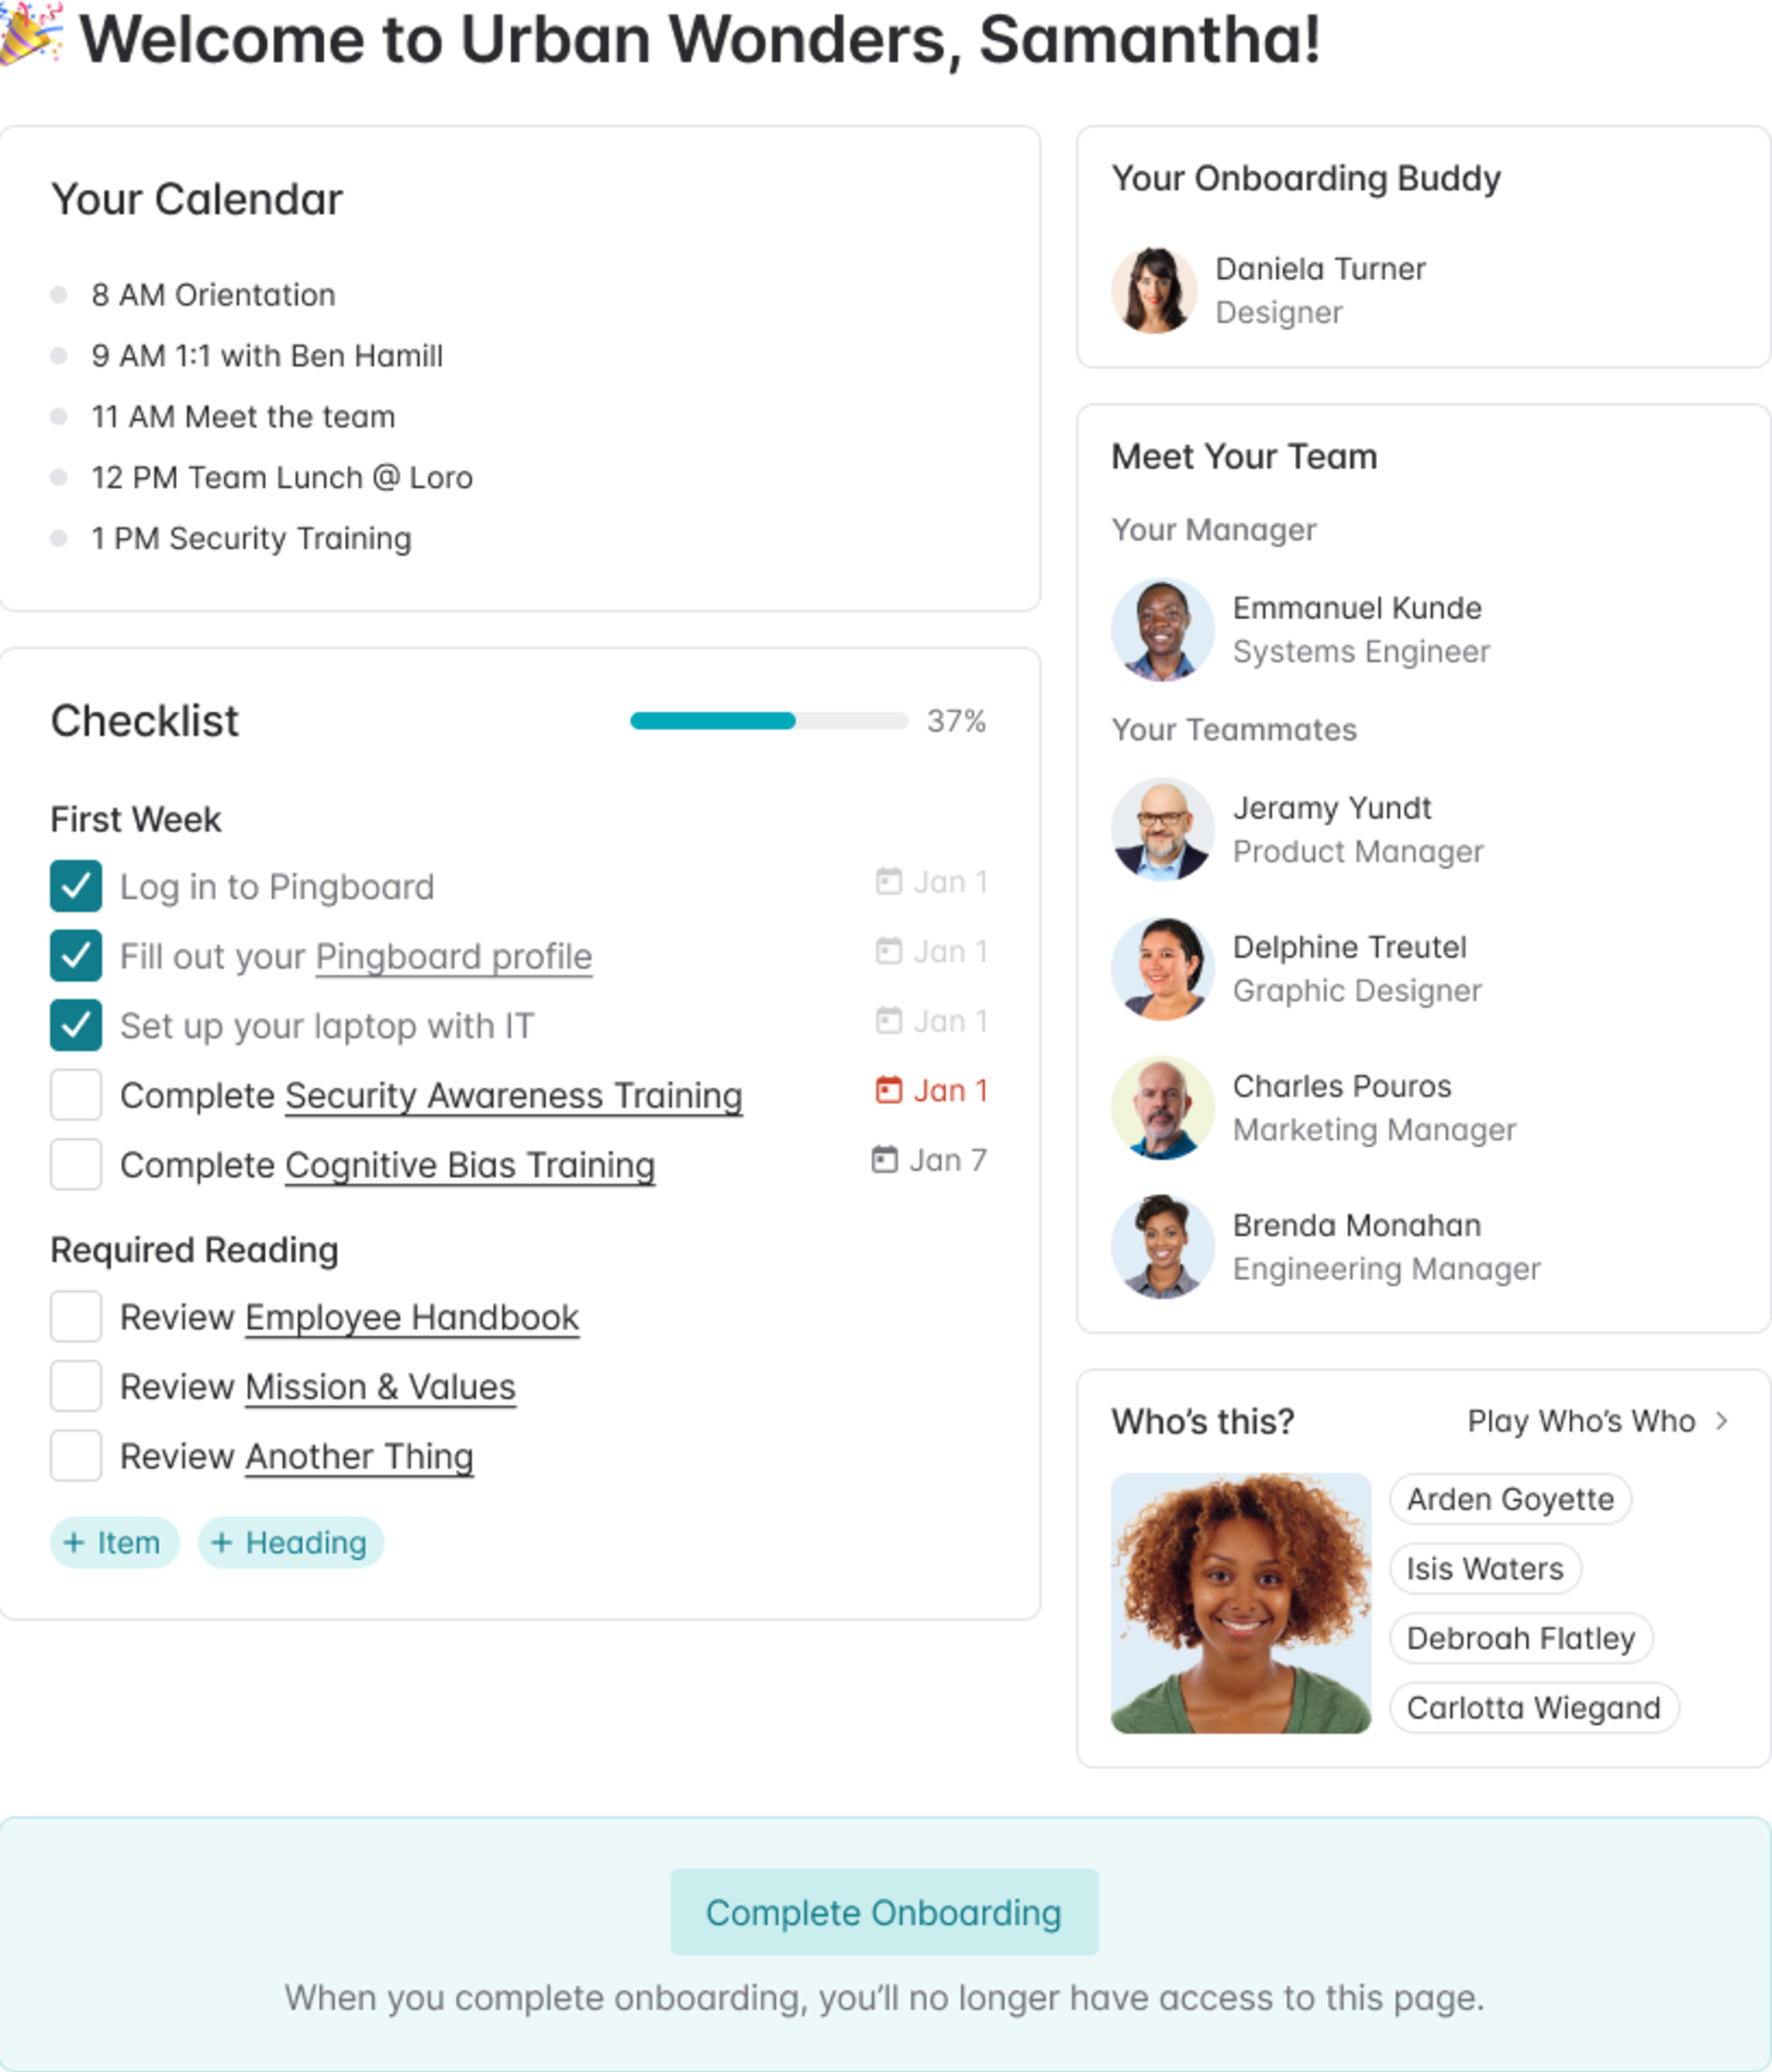 Pingboard Onboarding Checklist for new hires